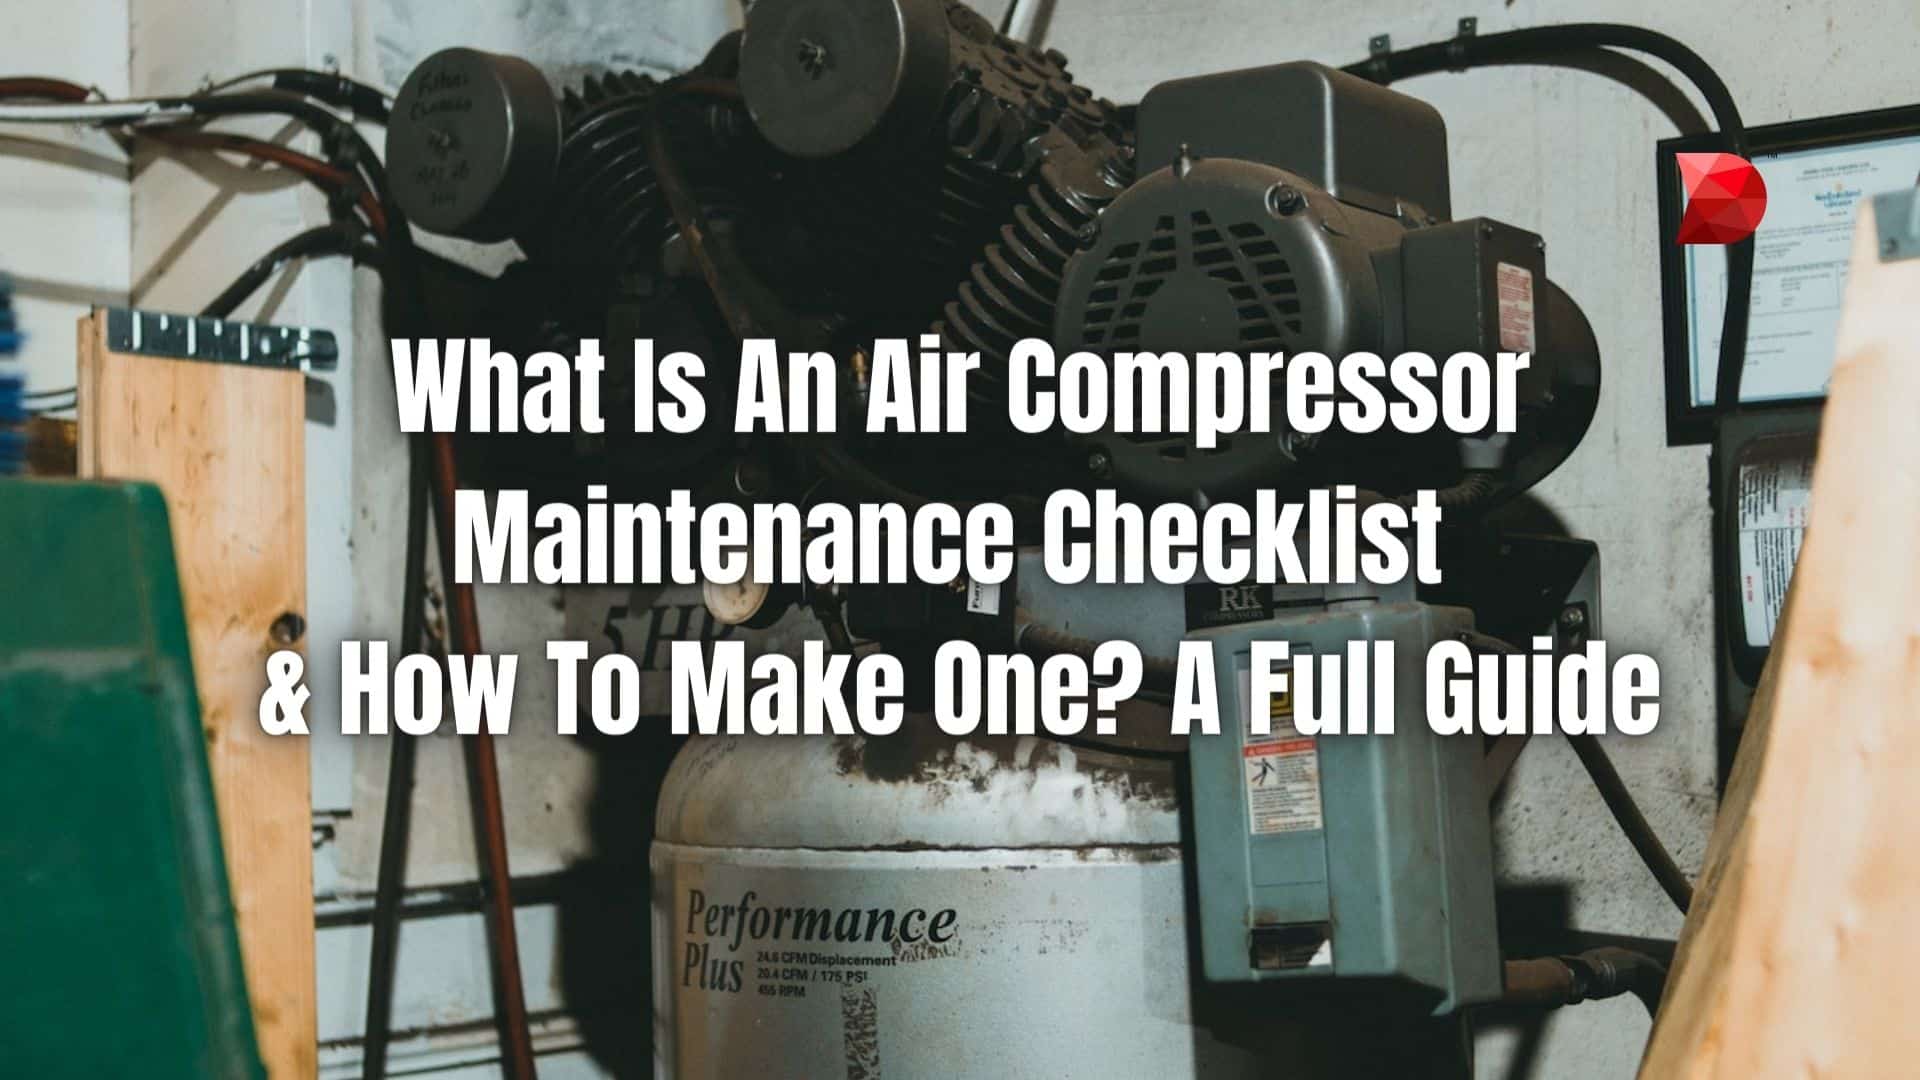 What Is An Air Compressor Maintenance Checklist & How To Make One A Full Guide